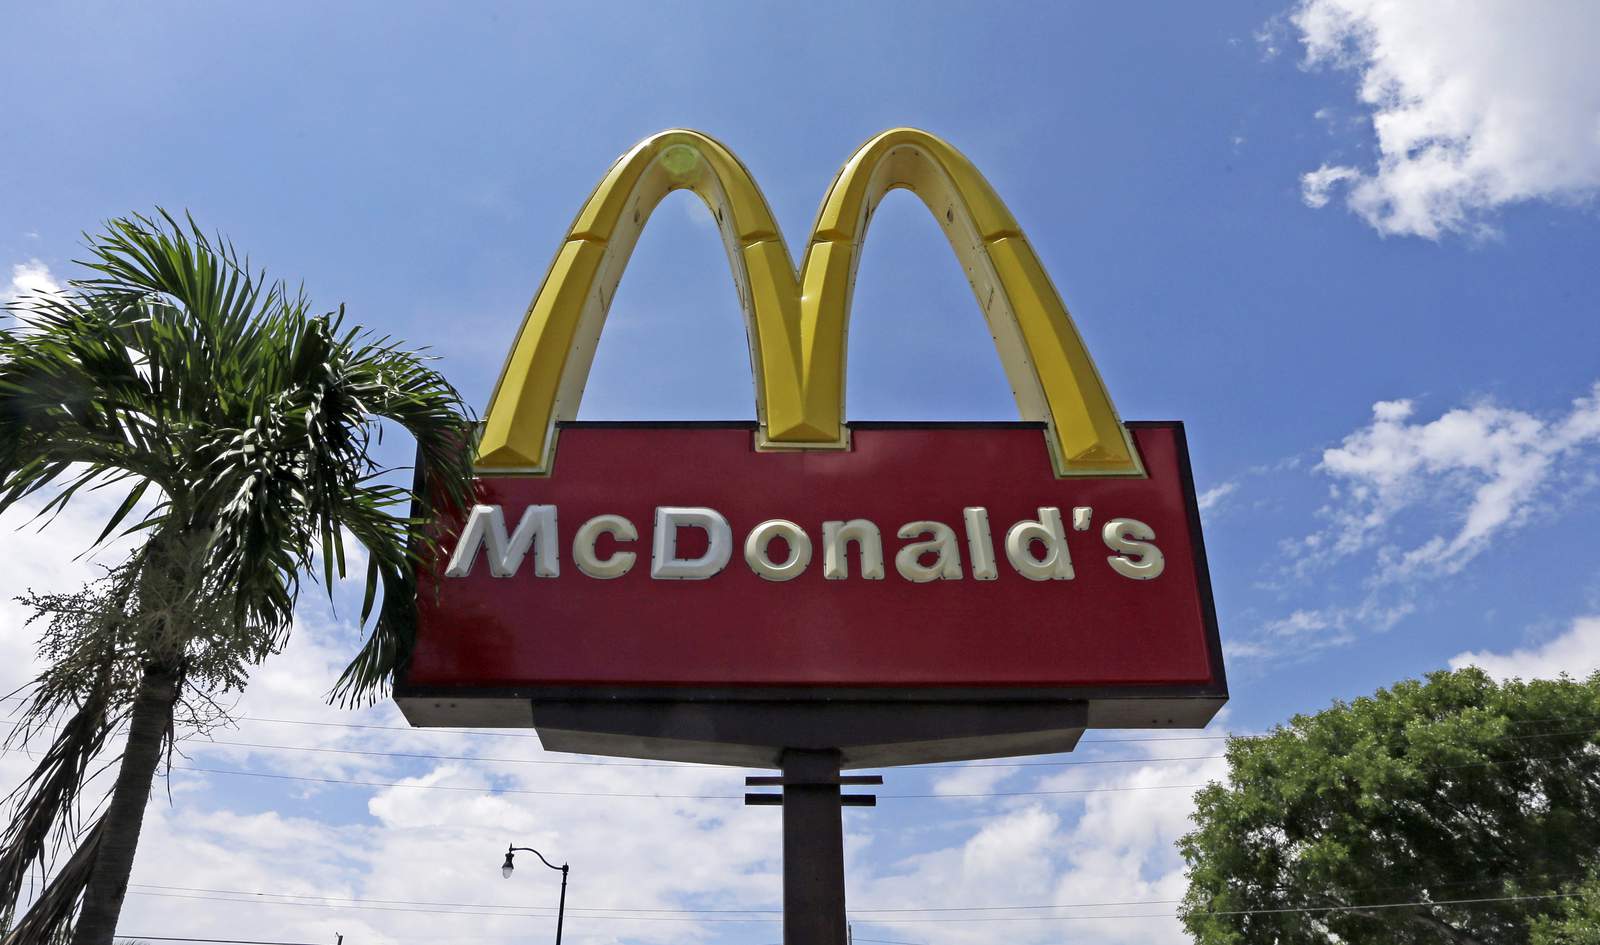 McDonald’s giving free meals to first responders and healthcare workers in San Antonio